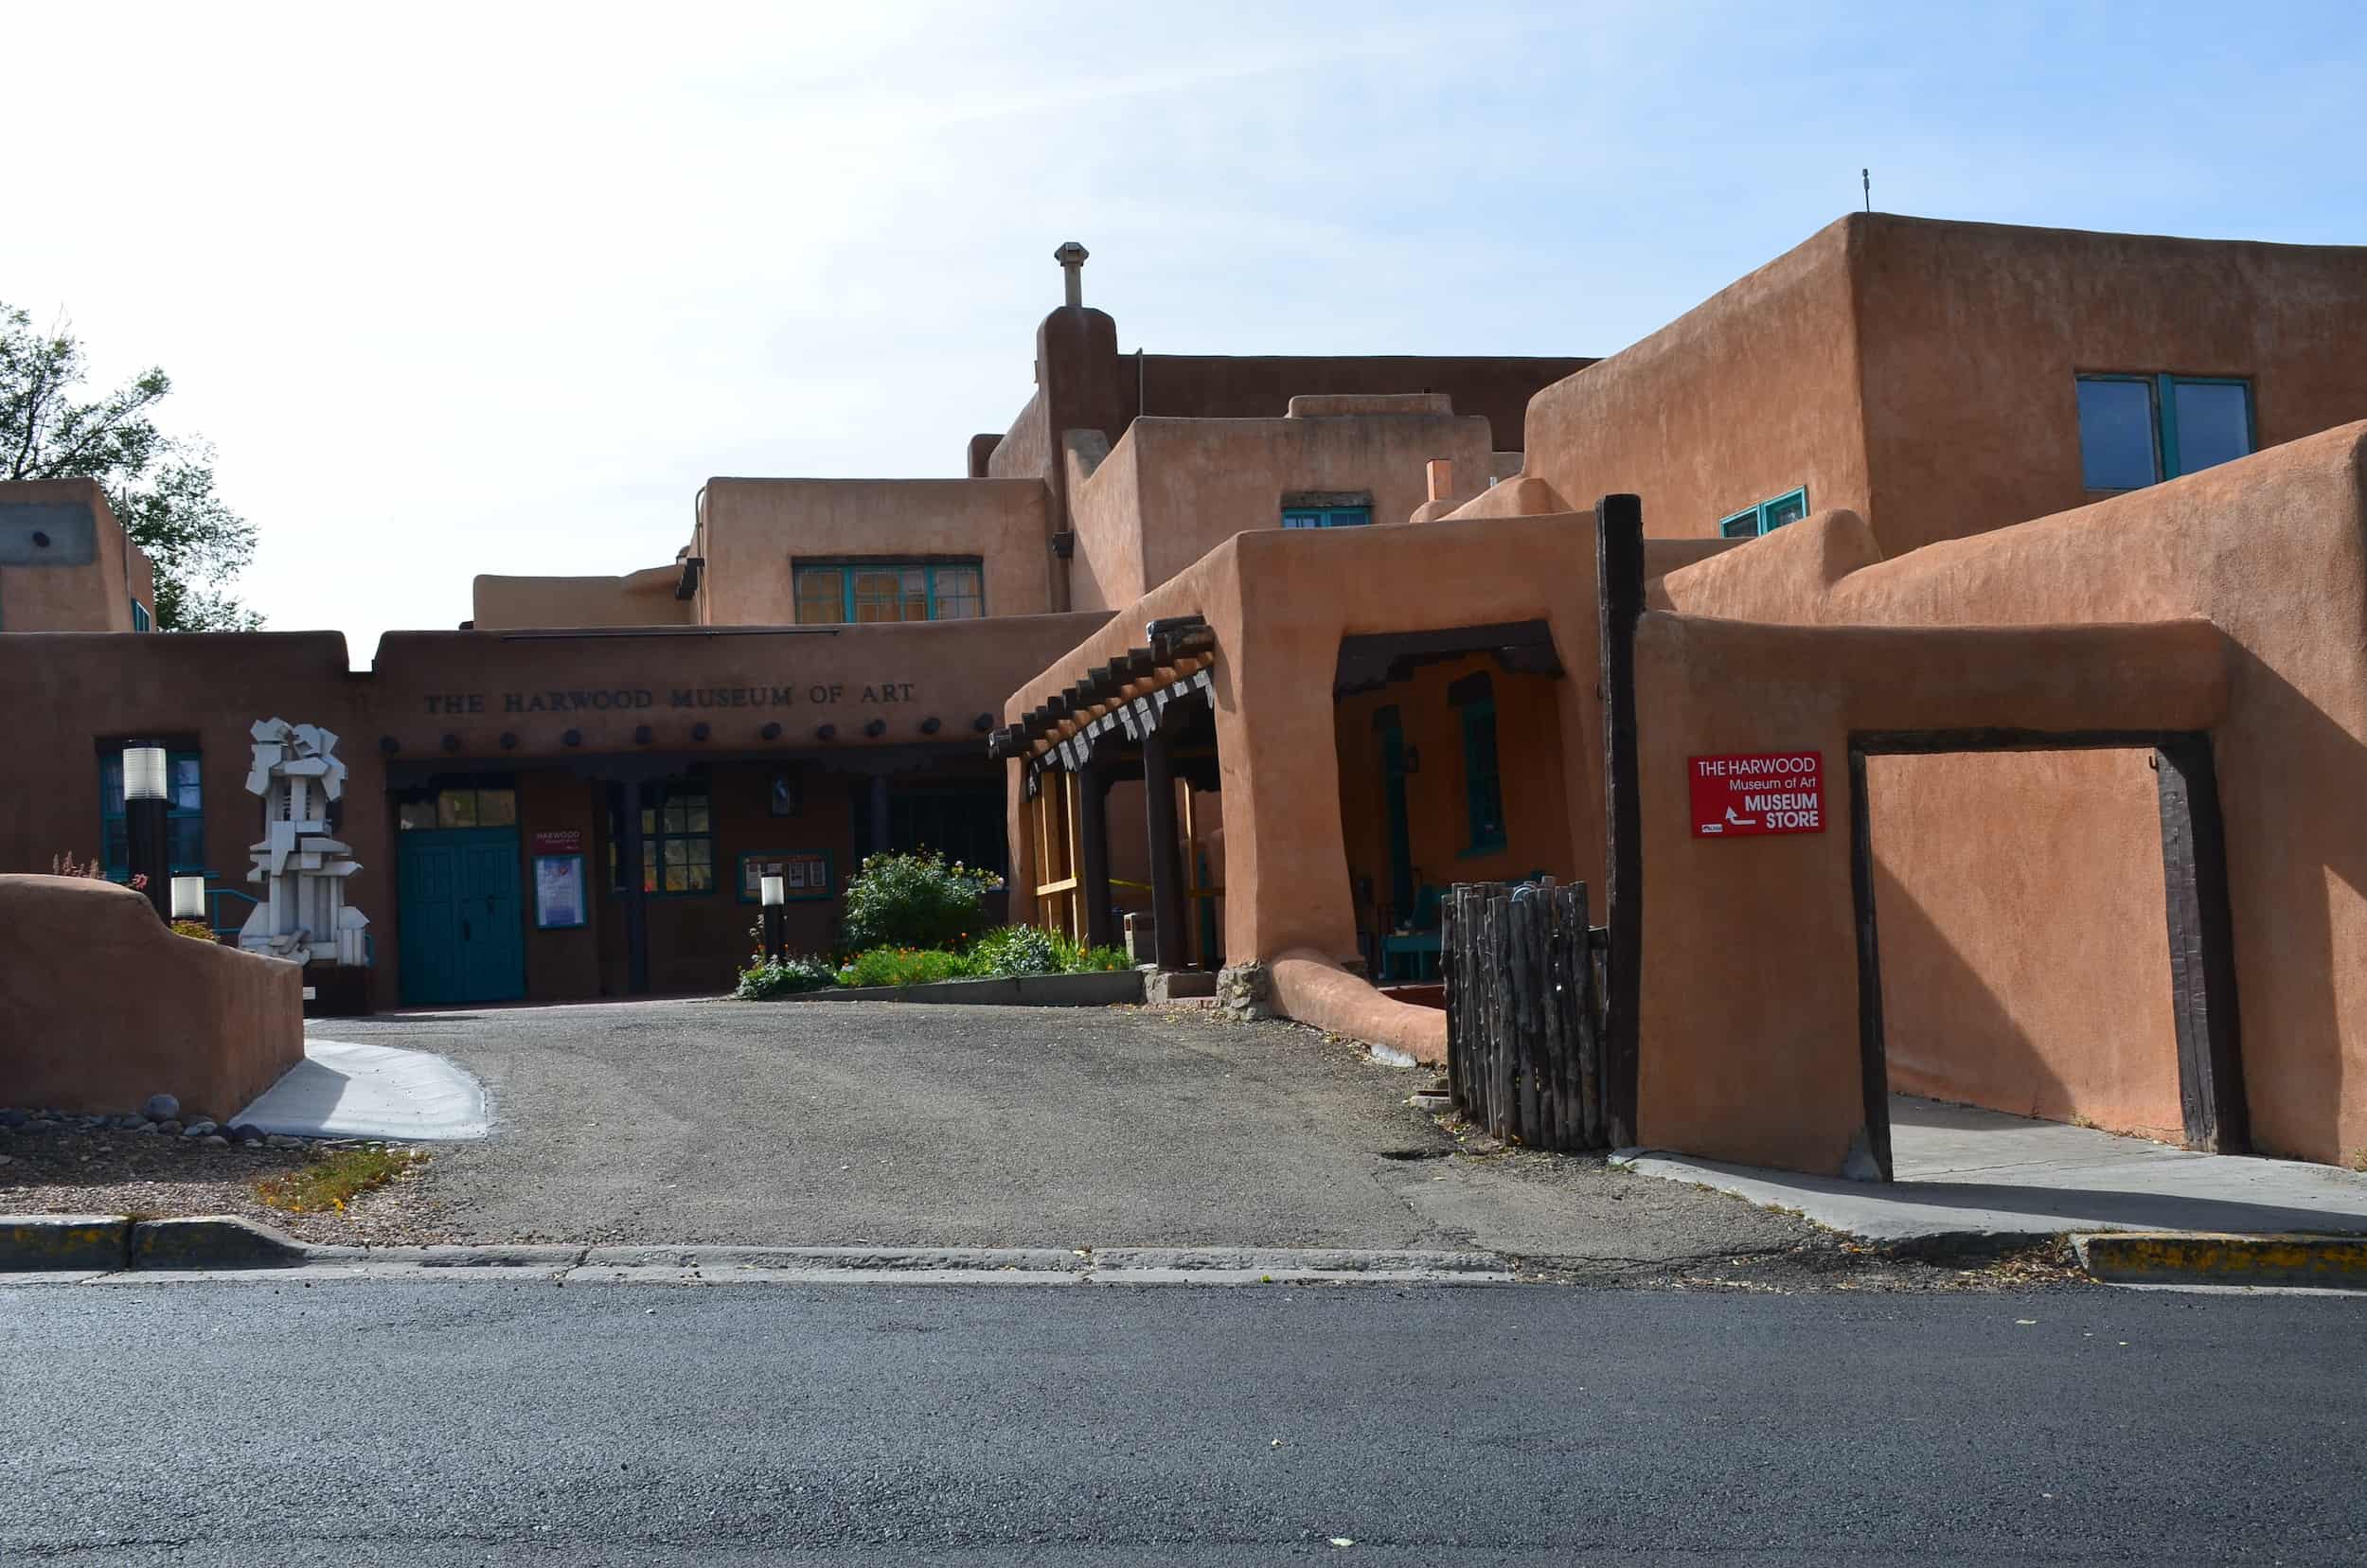 Harwood Museum of Art in the Downtown Taos Historic District of Taos, New Mexico